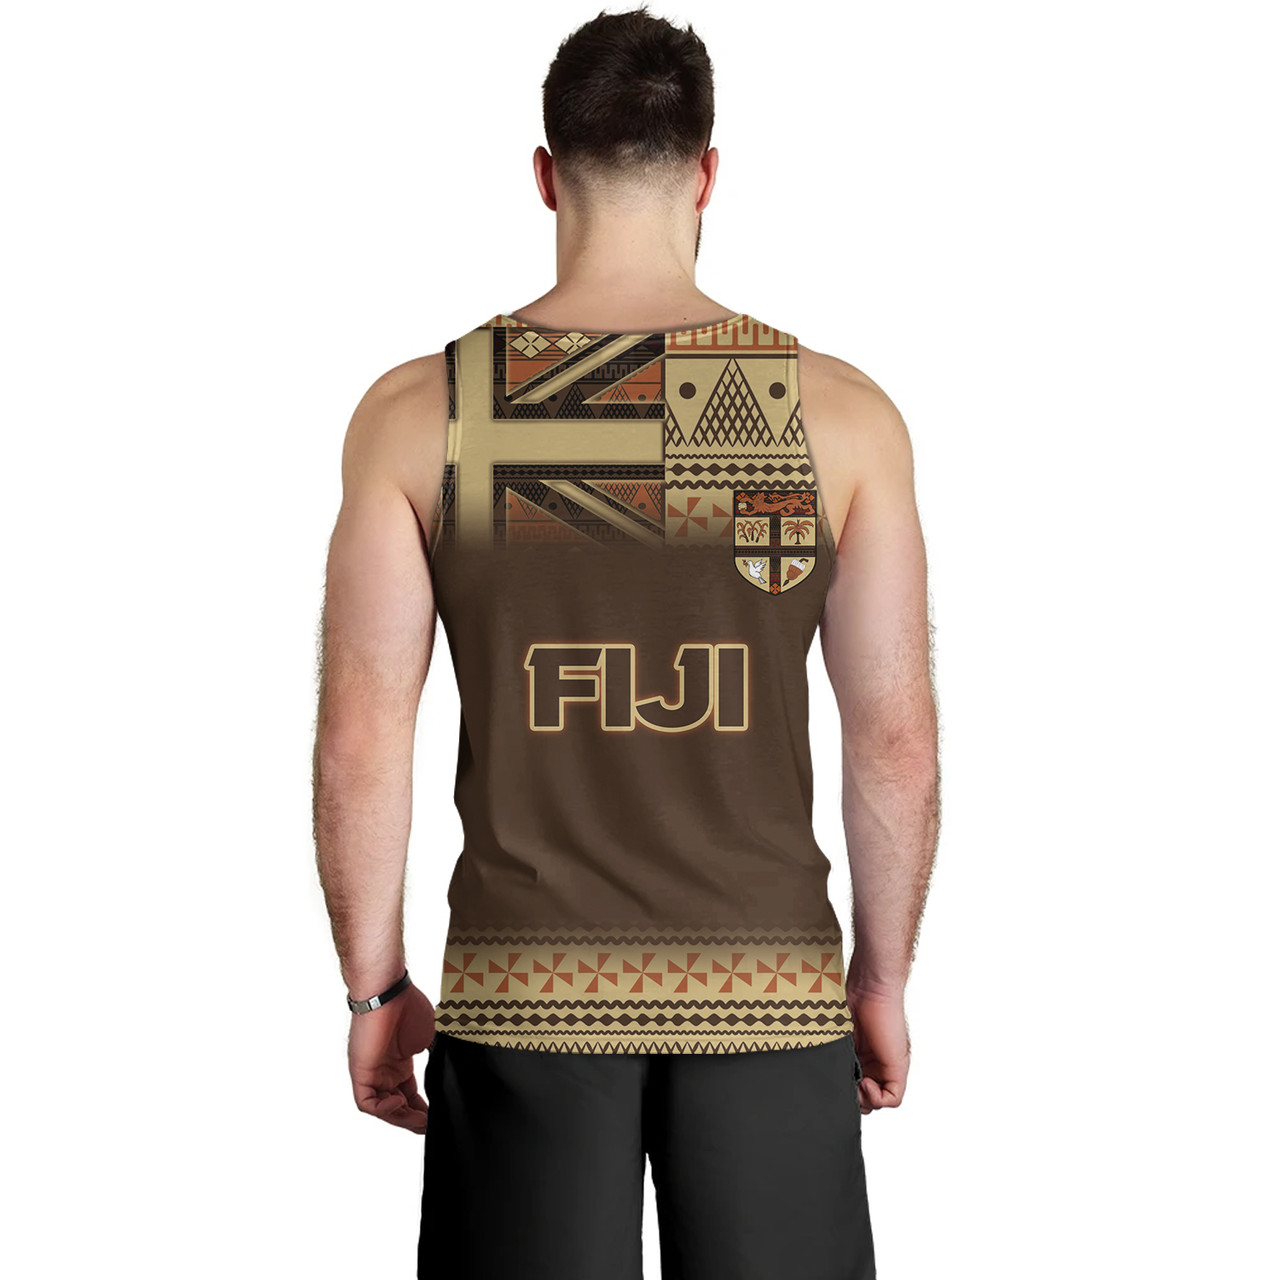 Fiji Tank Top Flag Color With Traditional Patterns Ver 2